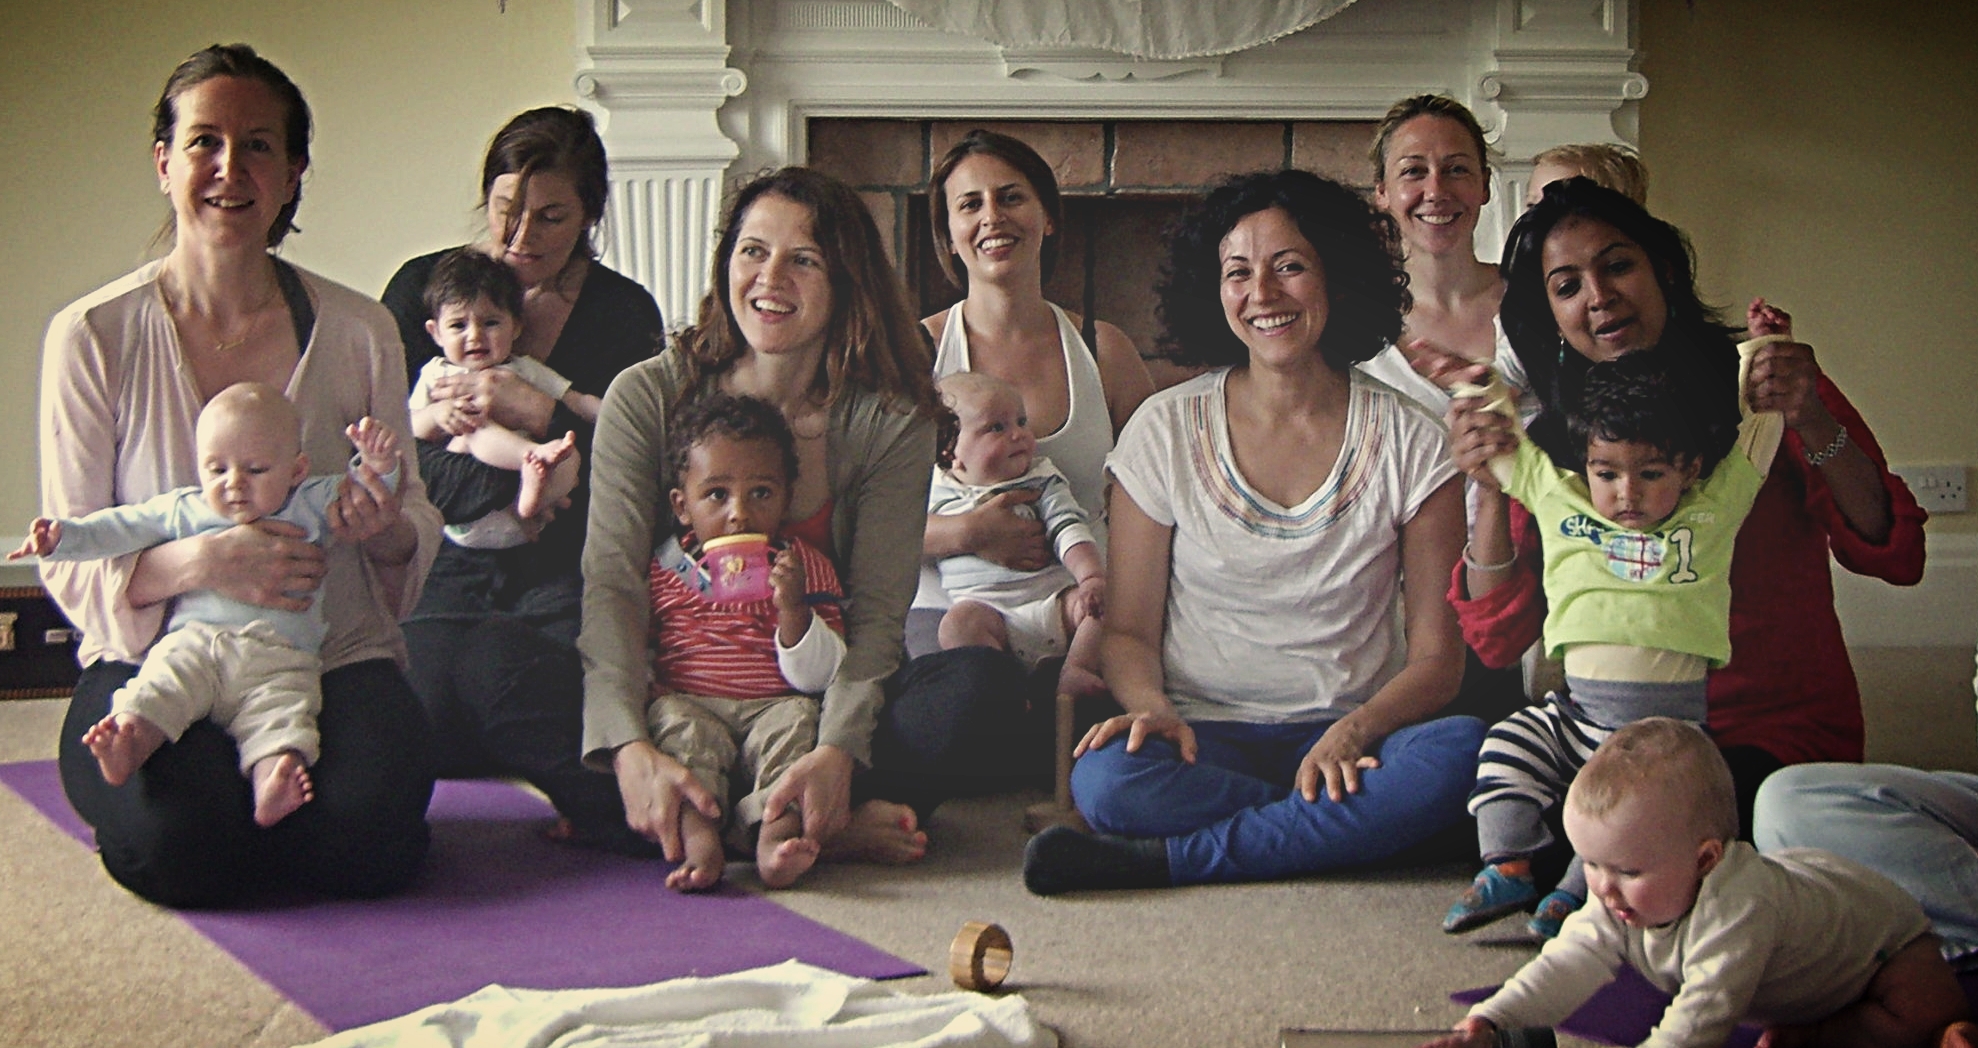 Mamaheaven Retreat for Mothers and Babies